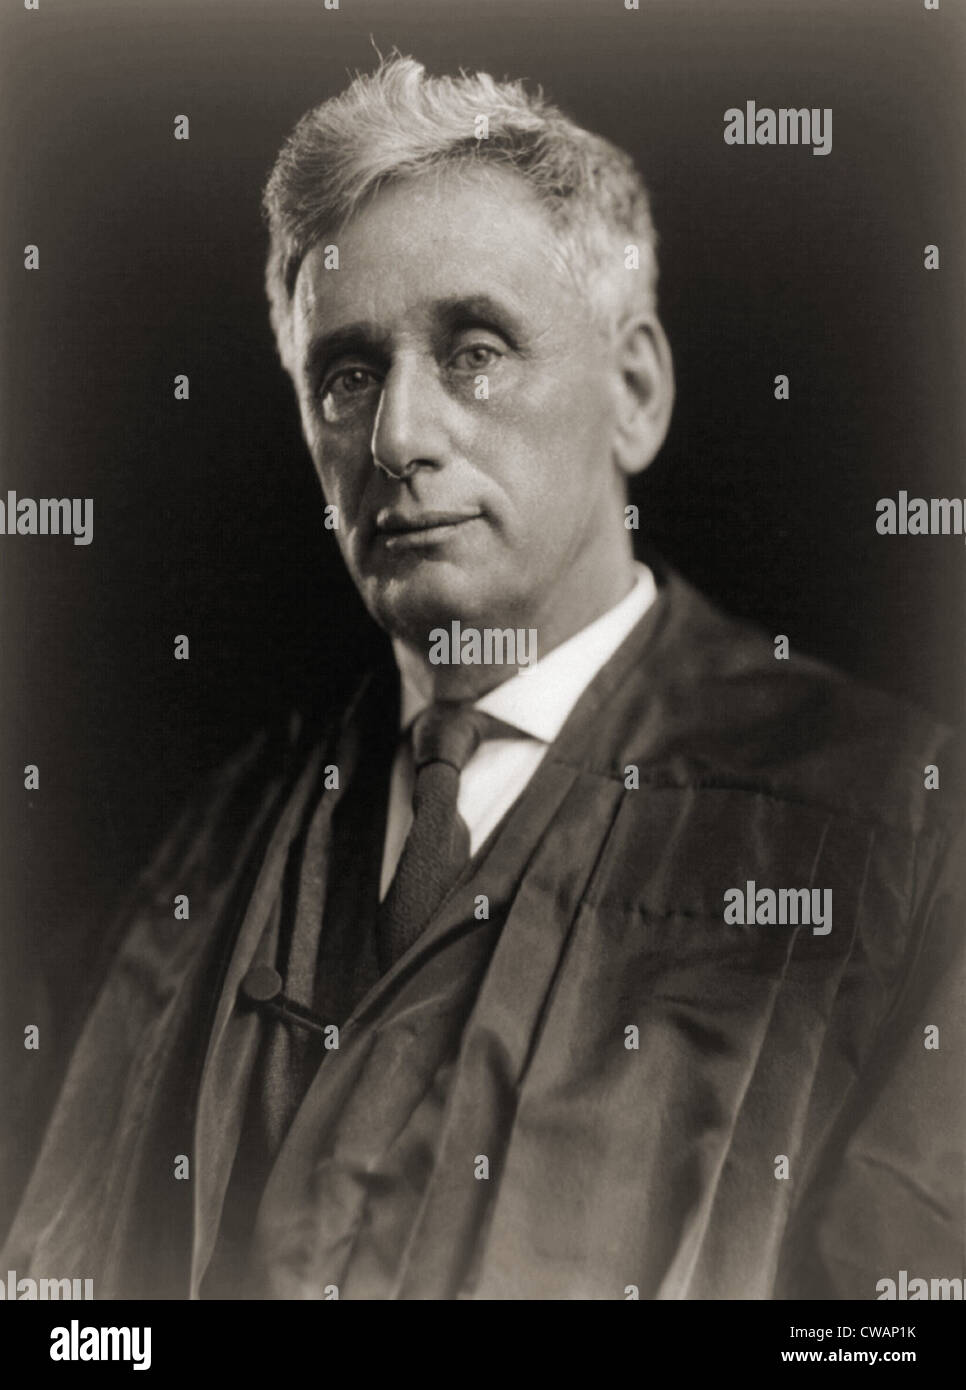 Louis F. Brandeis / Other People's Money (1913)